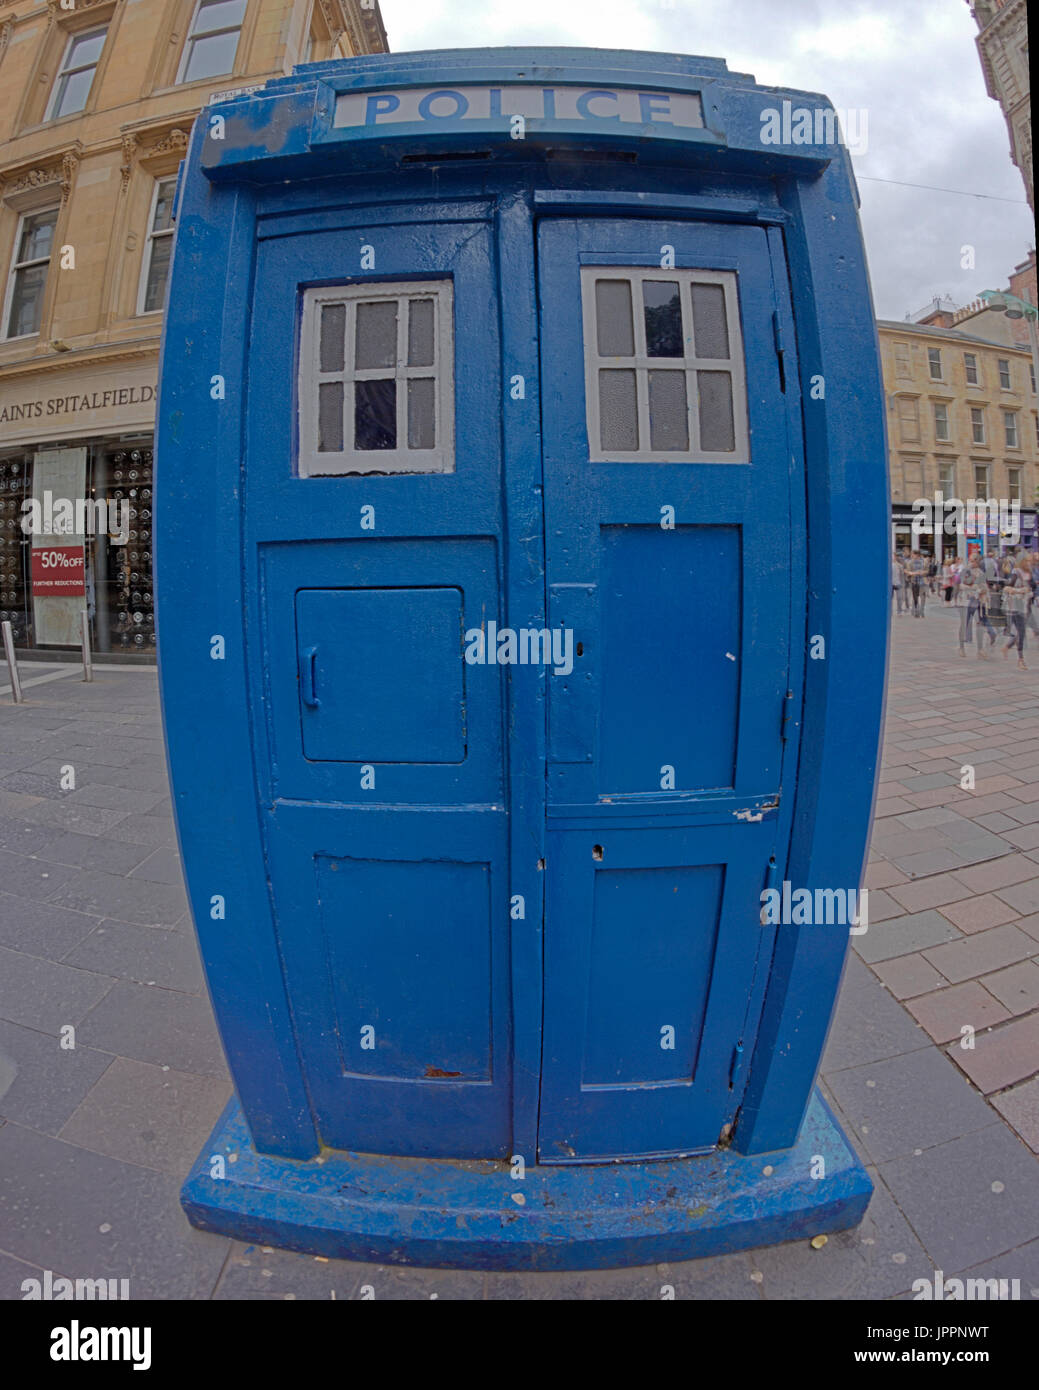 fat google eyed tardis blue police telephone box site for The Ivy Glasgow World-famous celeb hangout  opening 2017 planned Stock Photo